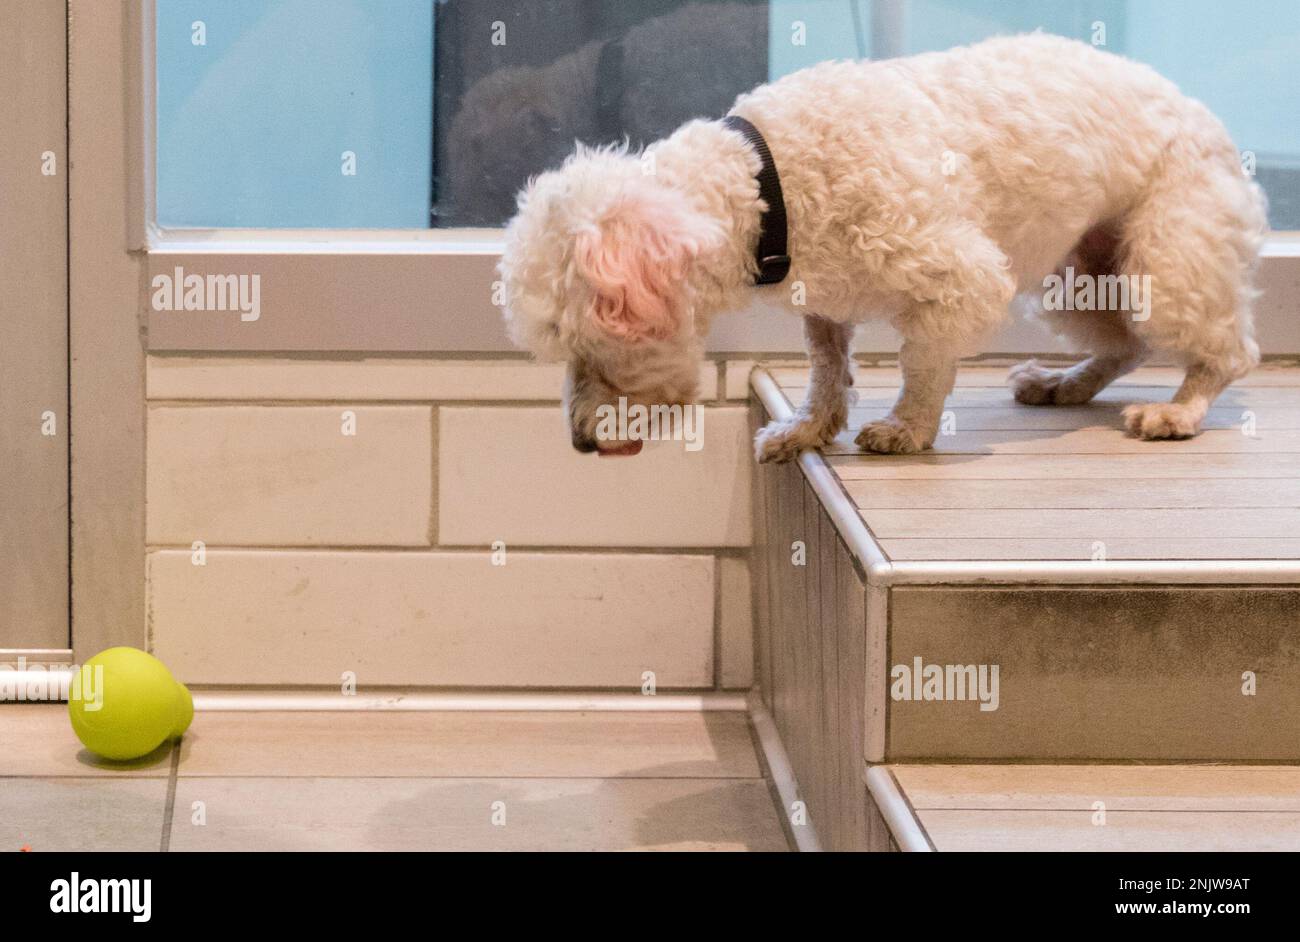 Peluchi, an adoptable dog, stares down a chew toy while in her room at the  San Francisco SPCA Adoption Center in San Francisco, Calif. Thursday, July  18, 2019. (Jessica Christian/San Francisco Chronicle